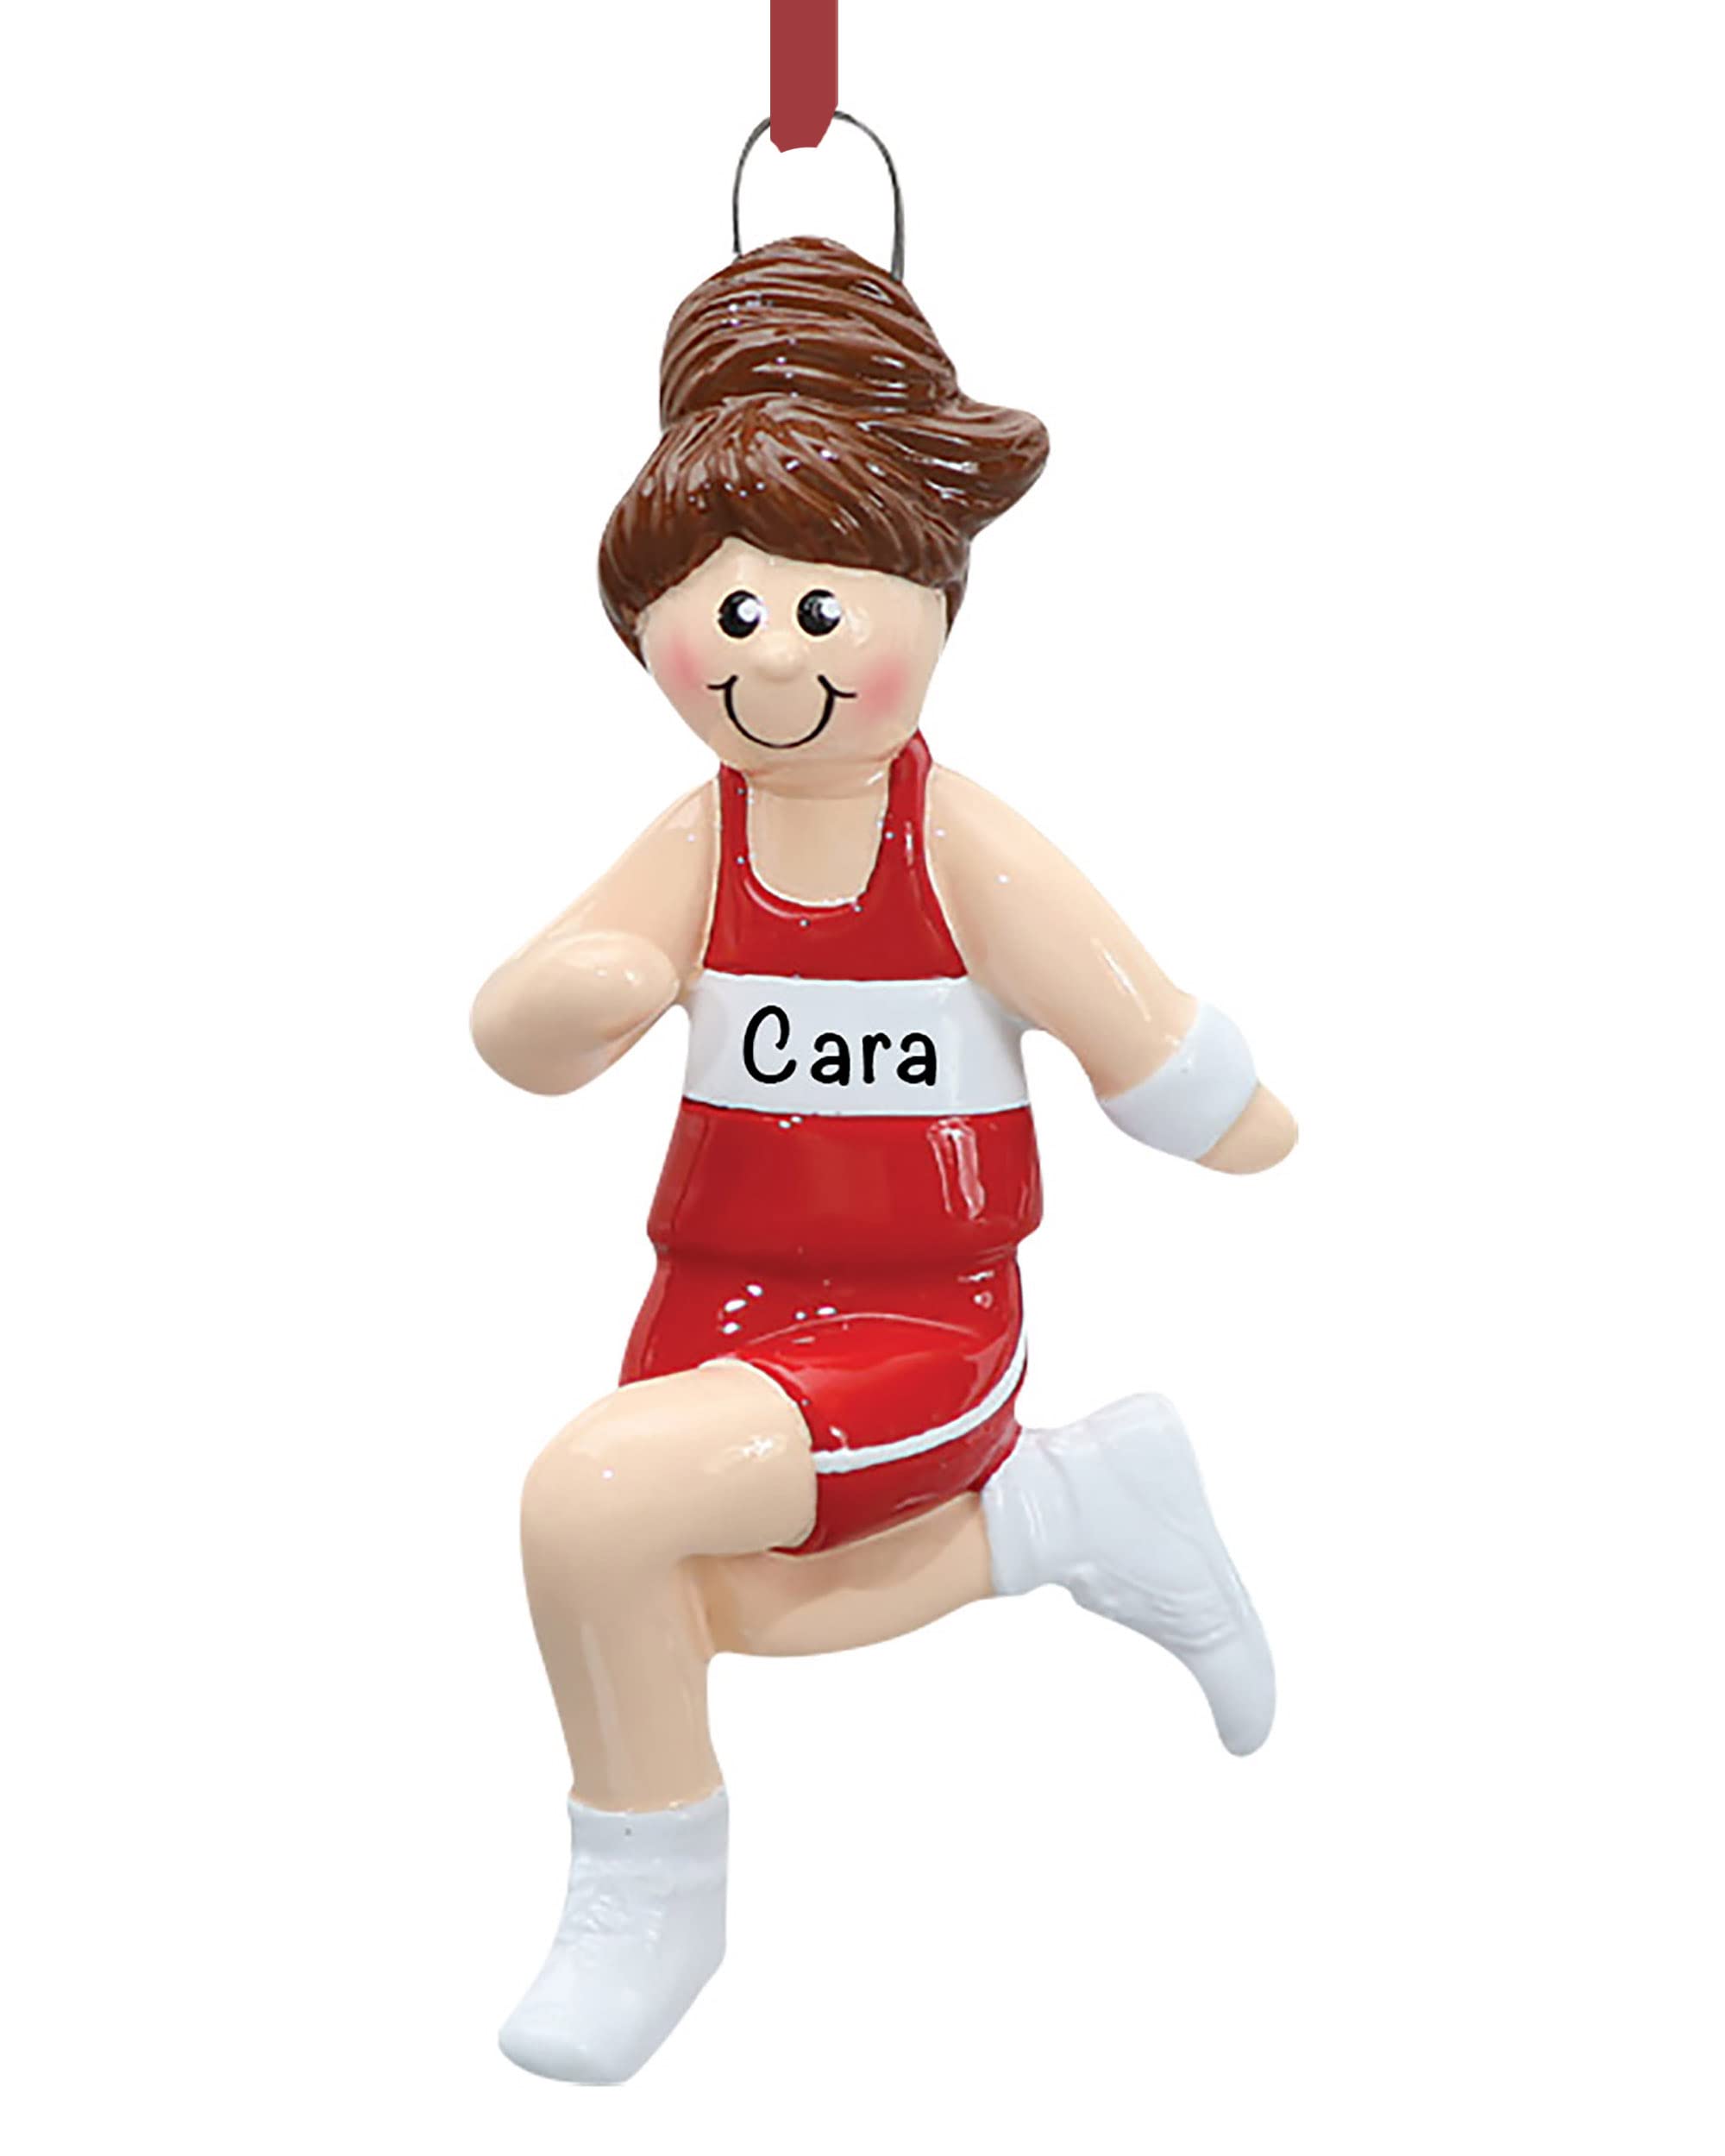 Holiday Traditions Personalized Running Christmas Ornament 2023 - Free Customization in 24 Hours - Girl Track Runner Ornament with Name - Unique Ma